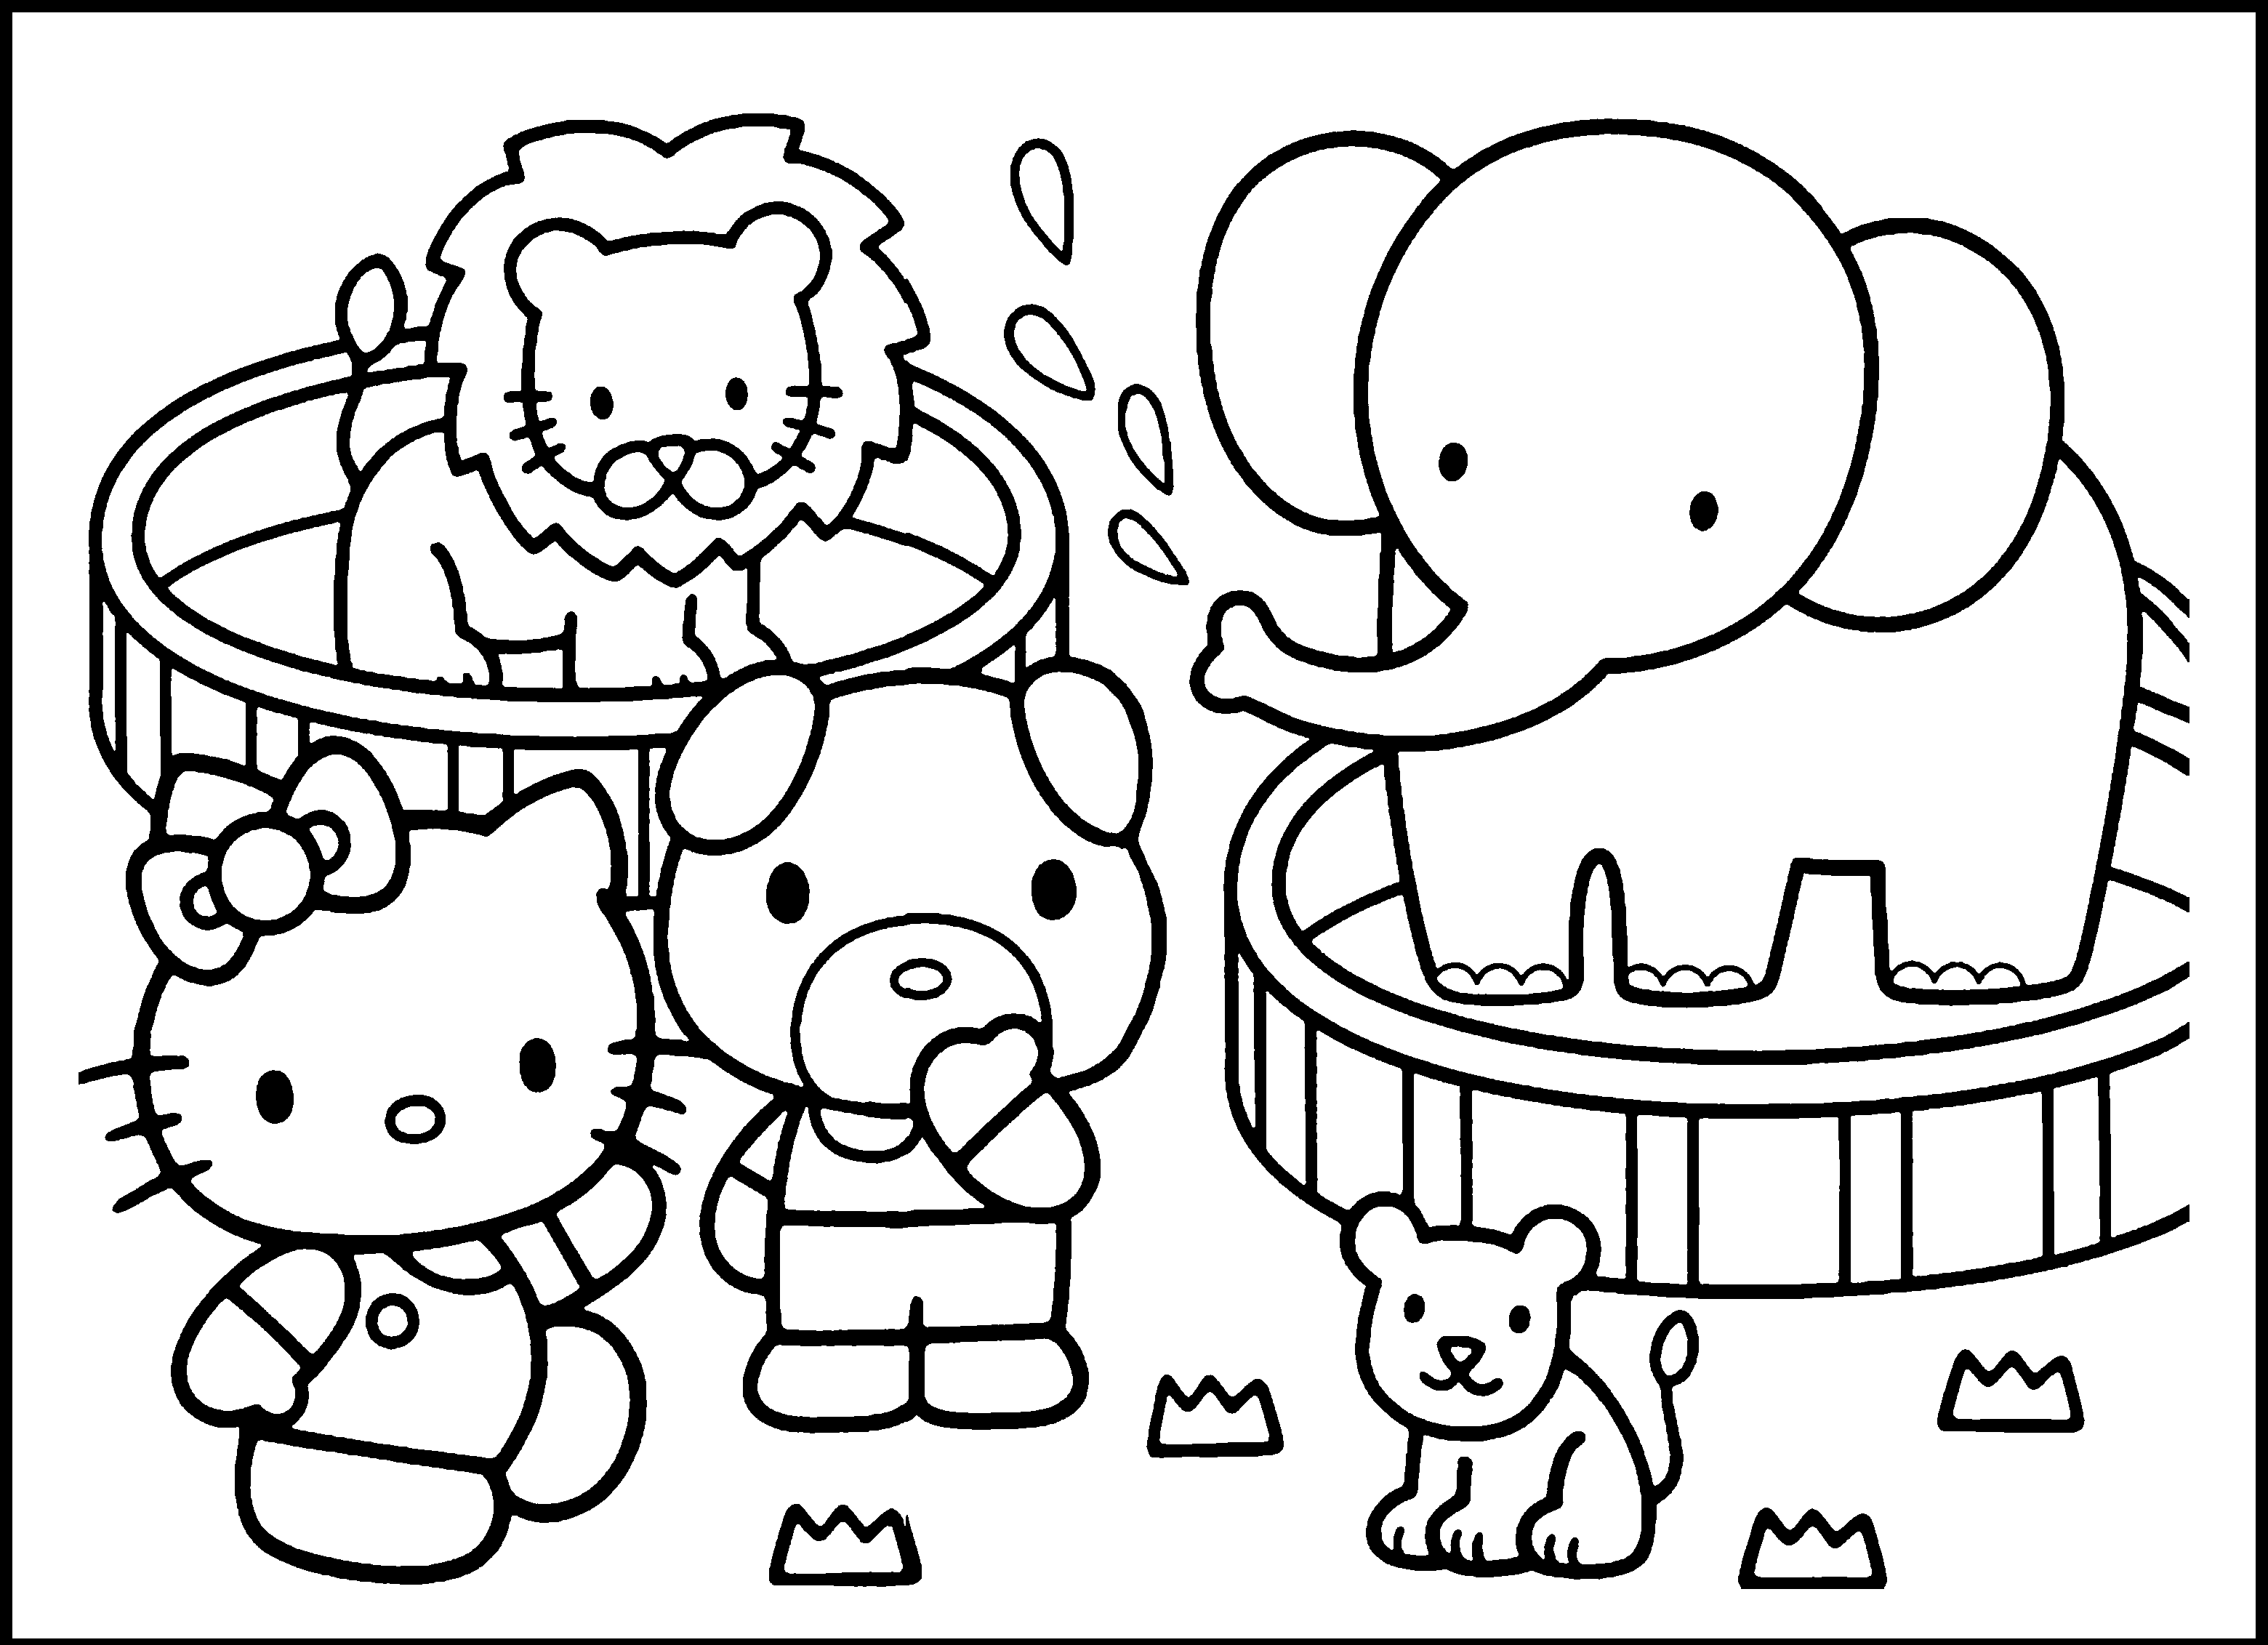 1st coloring pages for first grade - Clip Art Library